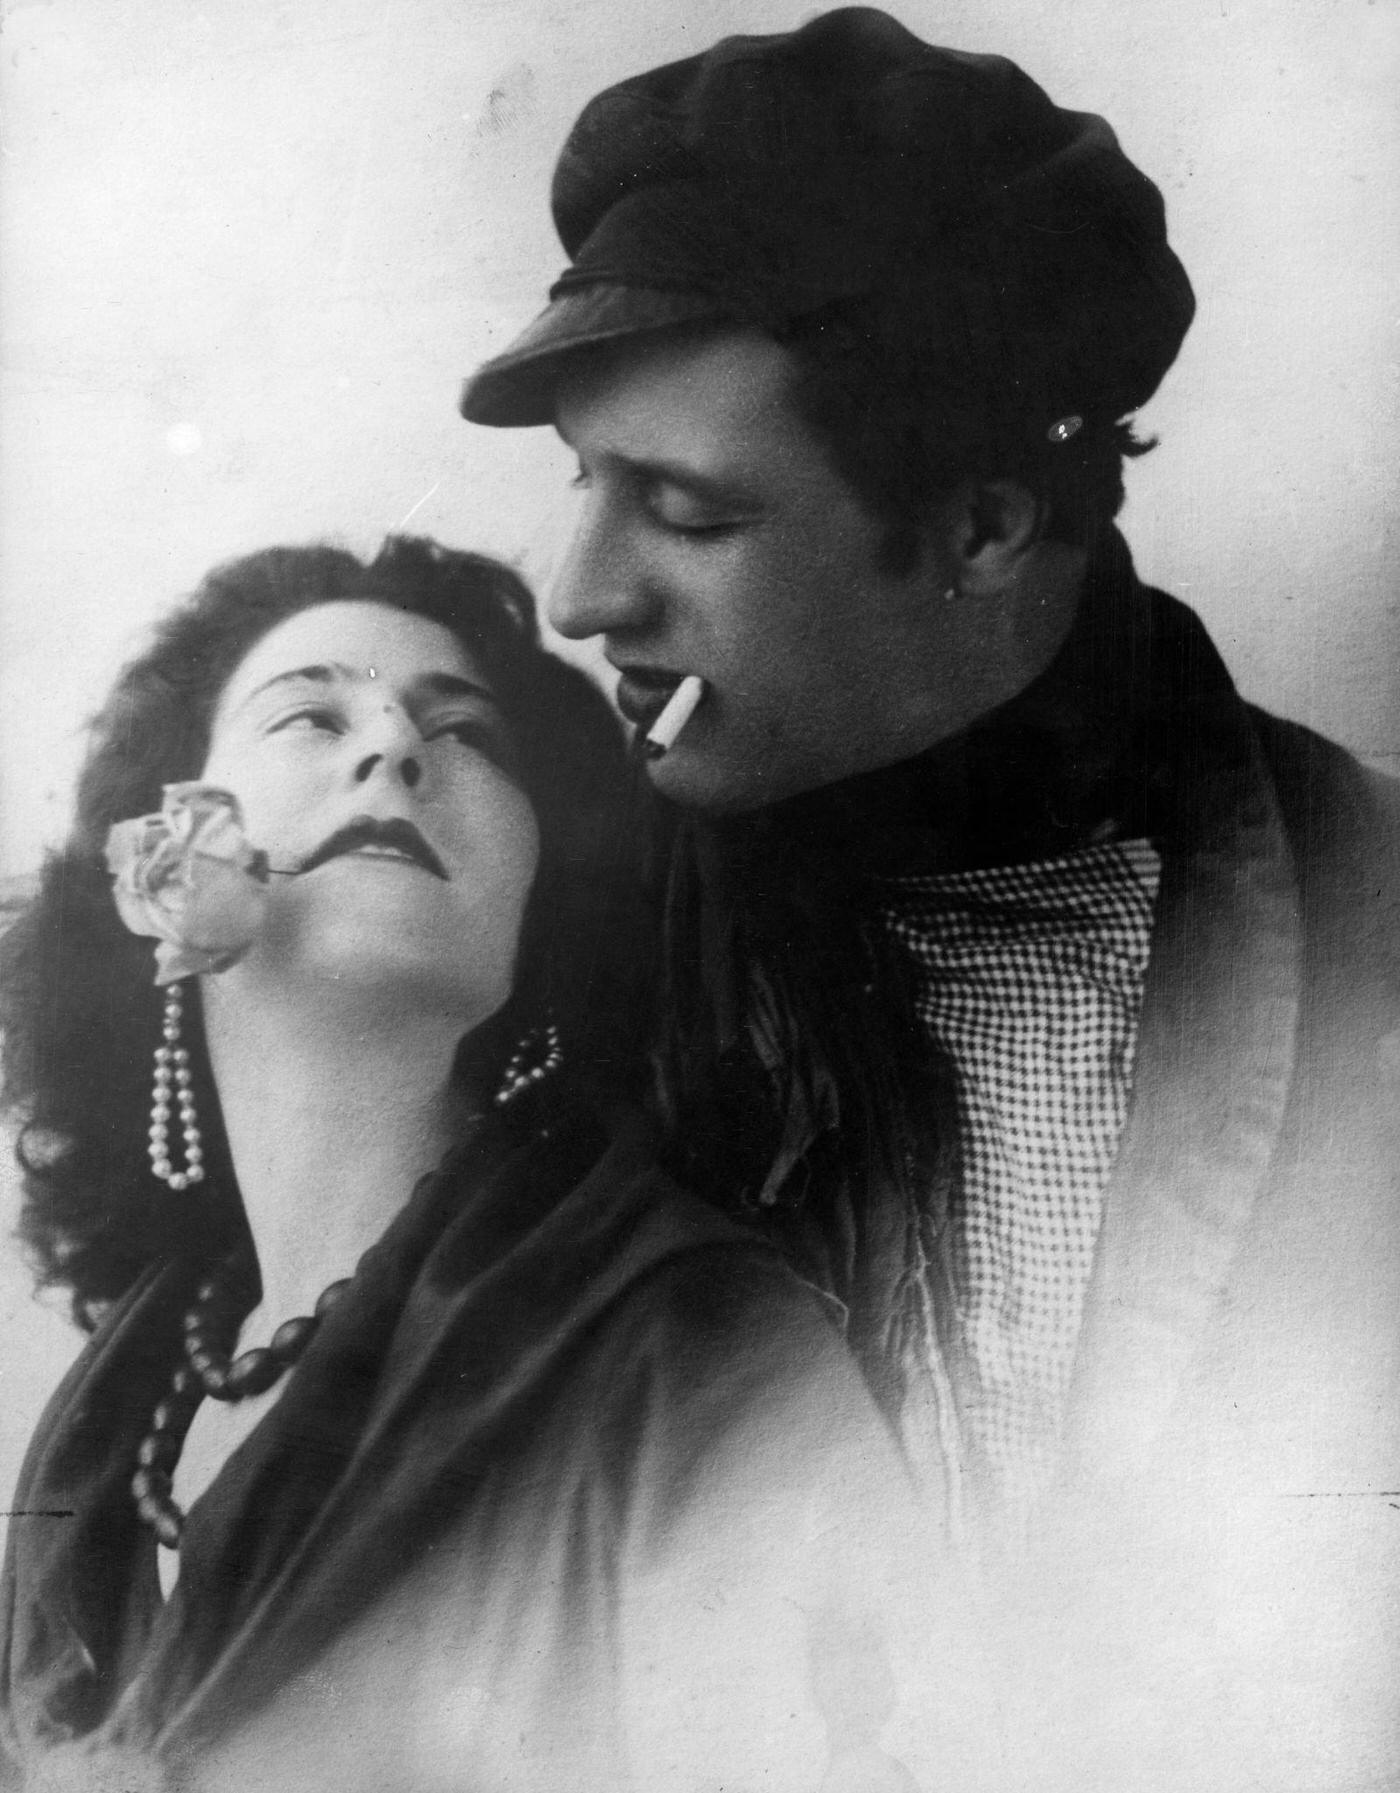 Seductive Gaze of a Couple in Love, 1925: Cigarette, Rose, and Intense Connection